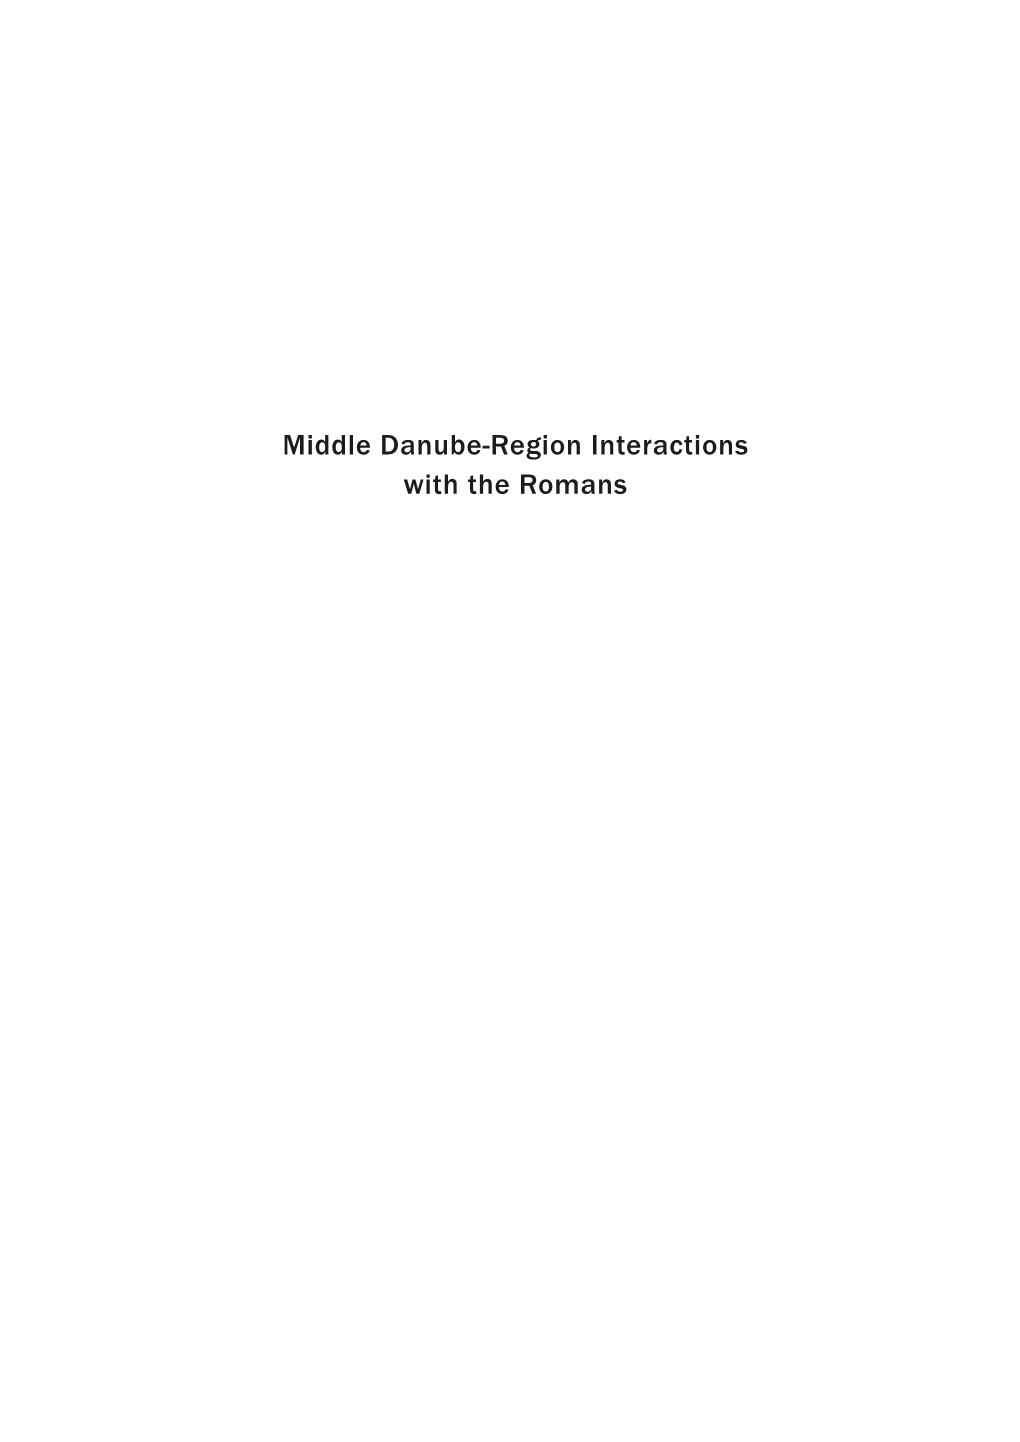 Middle Danube-Region Interactions with the Romans